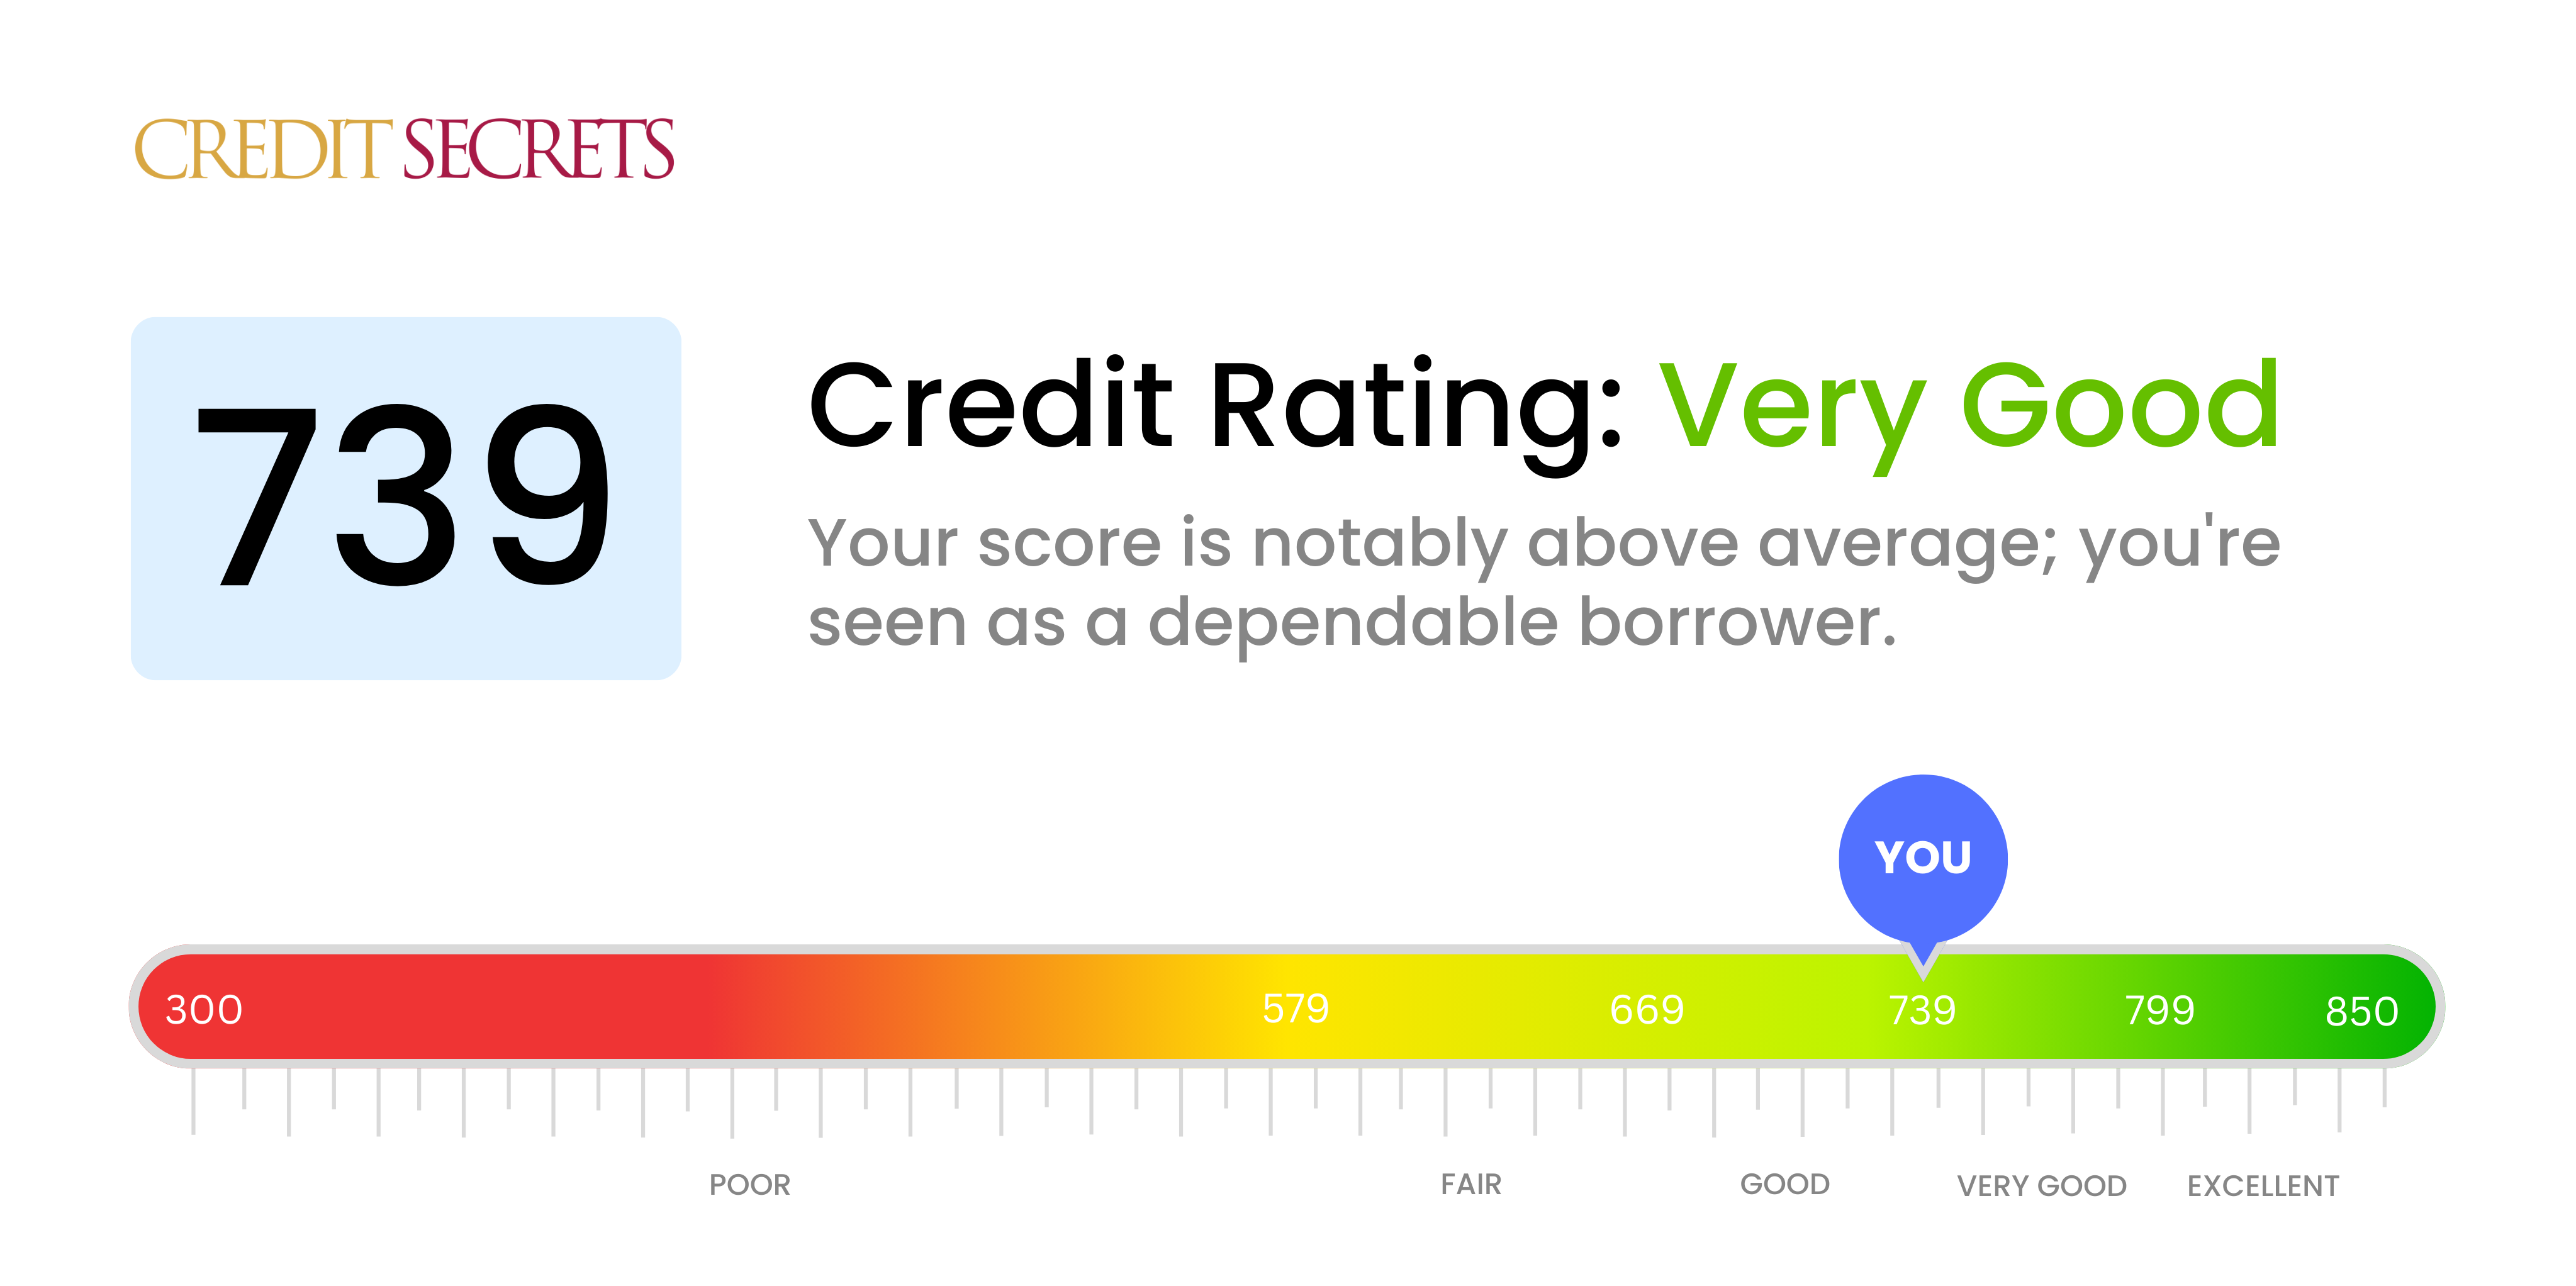 Is 739 a good credit score?